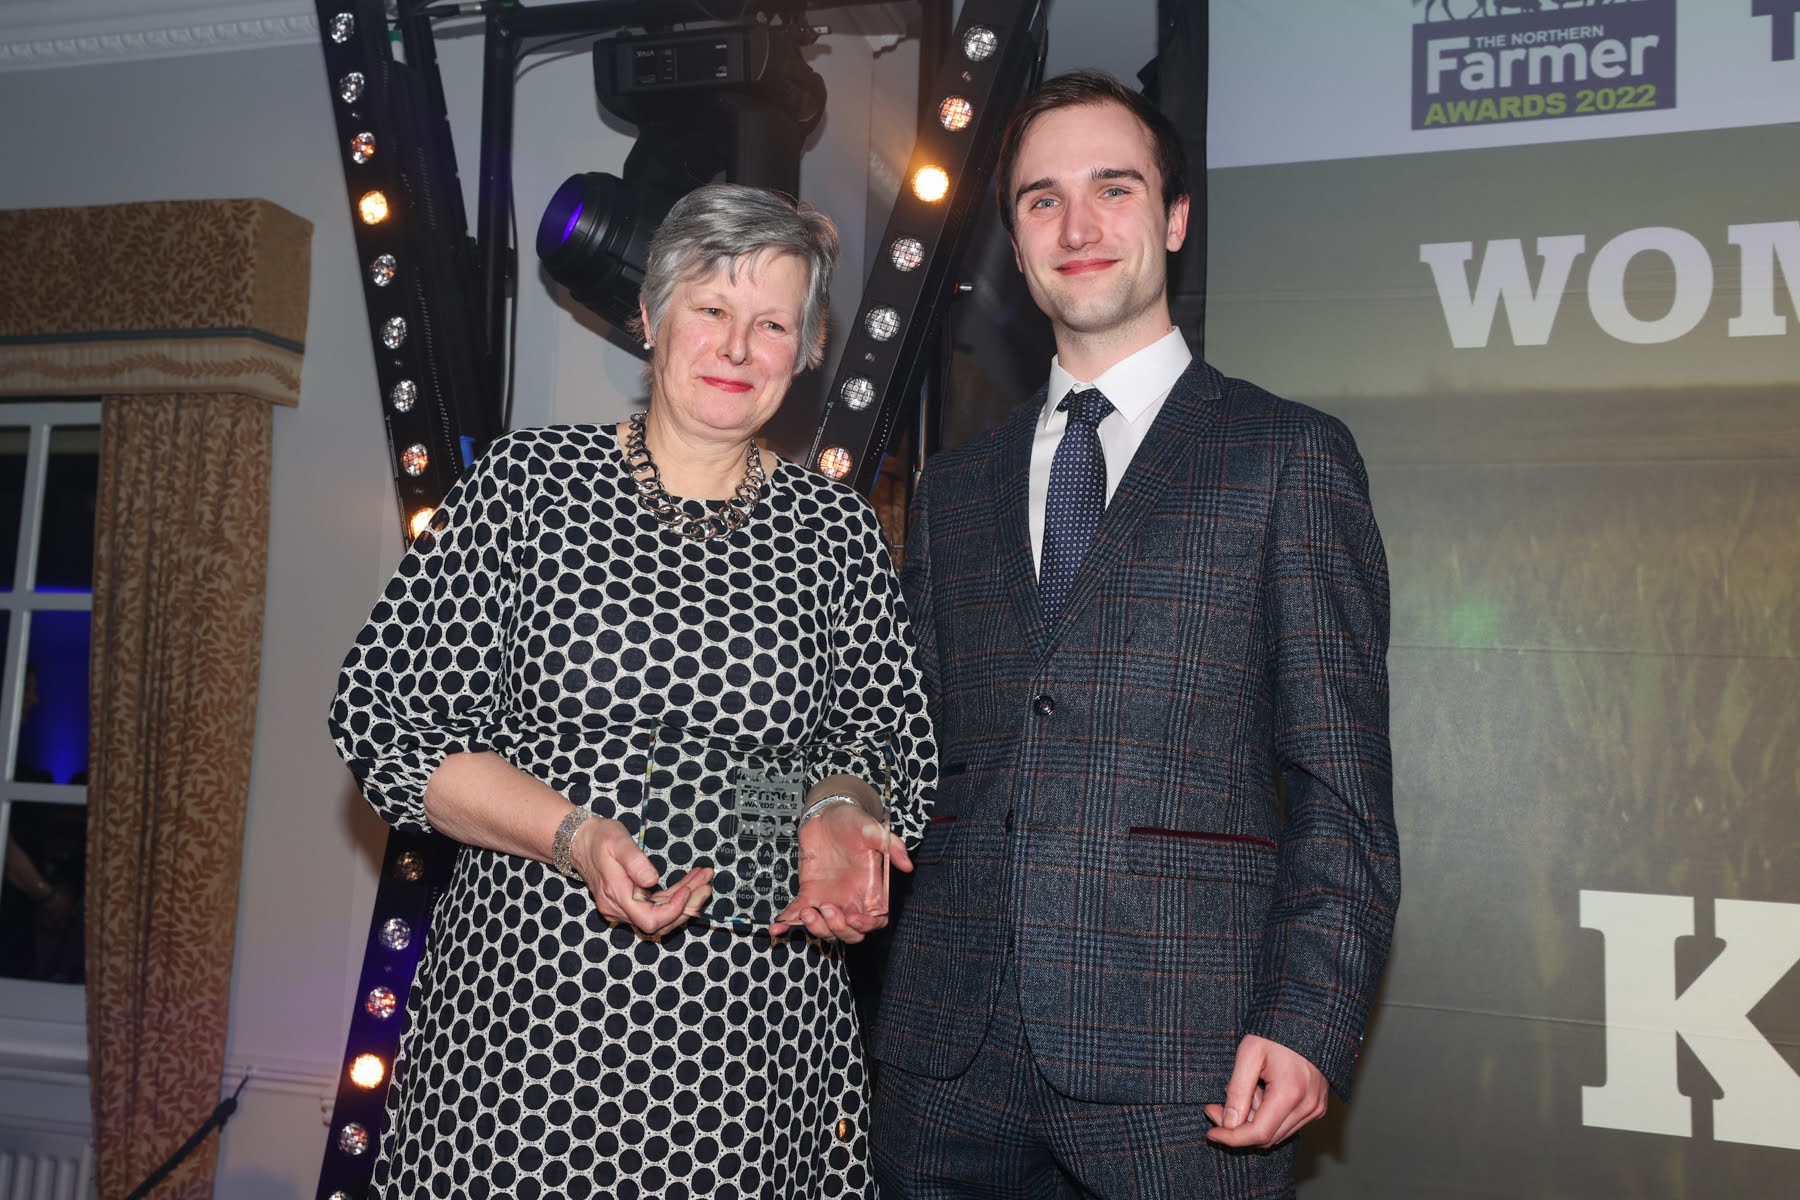 The Northern Farmer Awards 2022 held at The Pavilions in Harrogate. Winner of the Women in Agriculture Award, Kate Dale, presented by Andrew Grainger of Vencomatic. Picture: CHRIS BOOTH